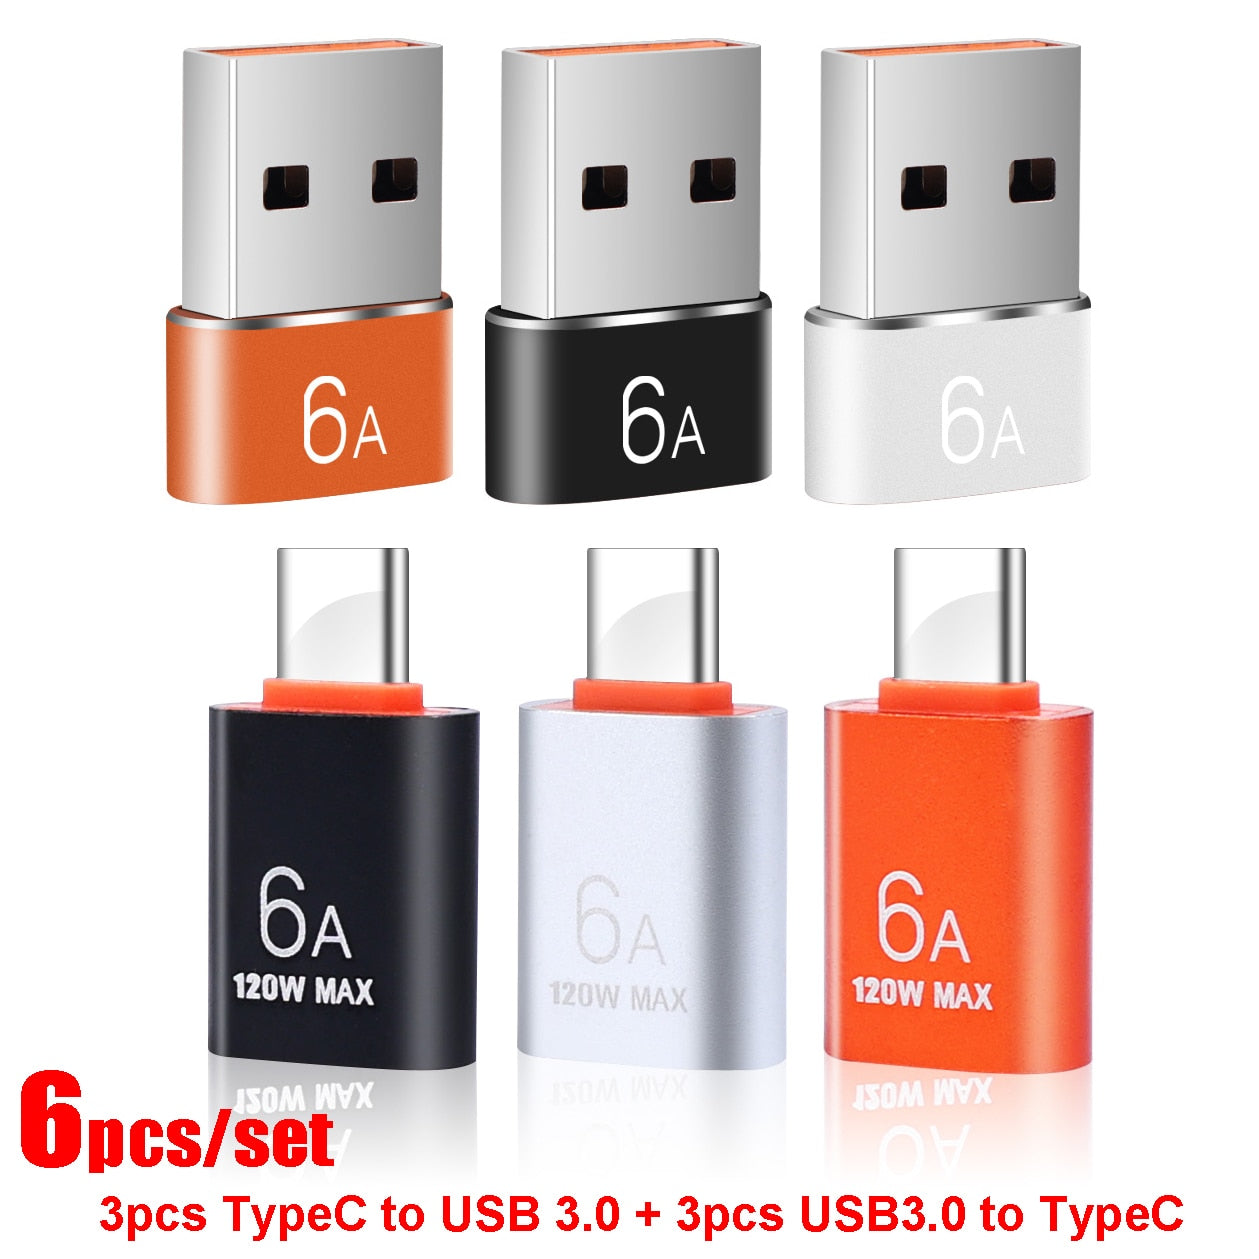 6A USB To Type-C and TypeC to USB OTG Converter USB 3.0 Adapter for Samsung Xiaomi PC MacBook Pro USB C Charging Connector